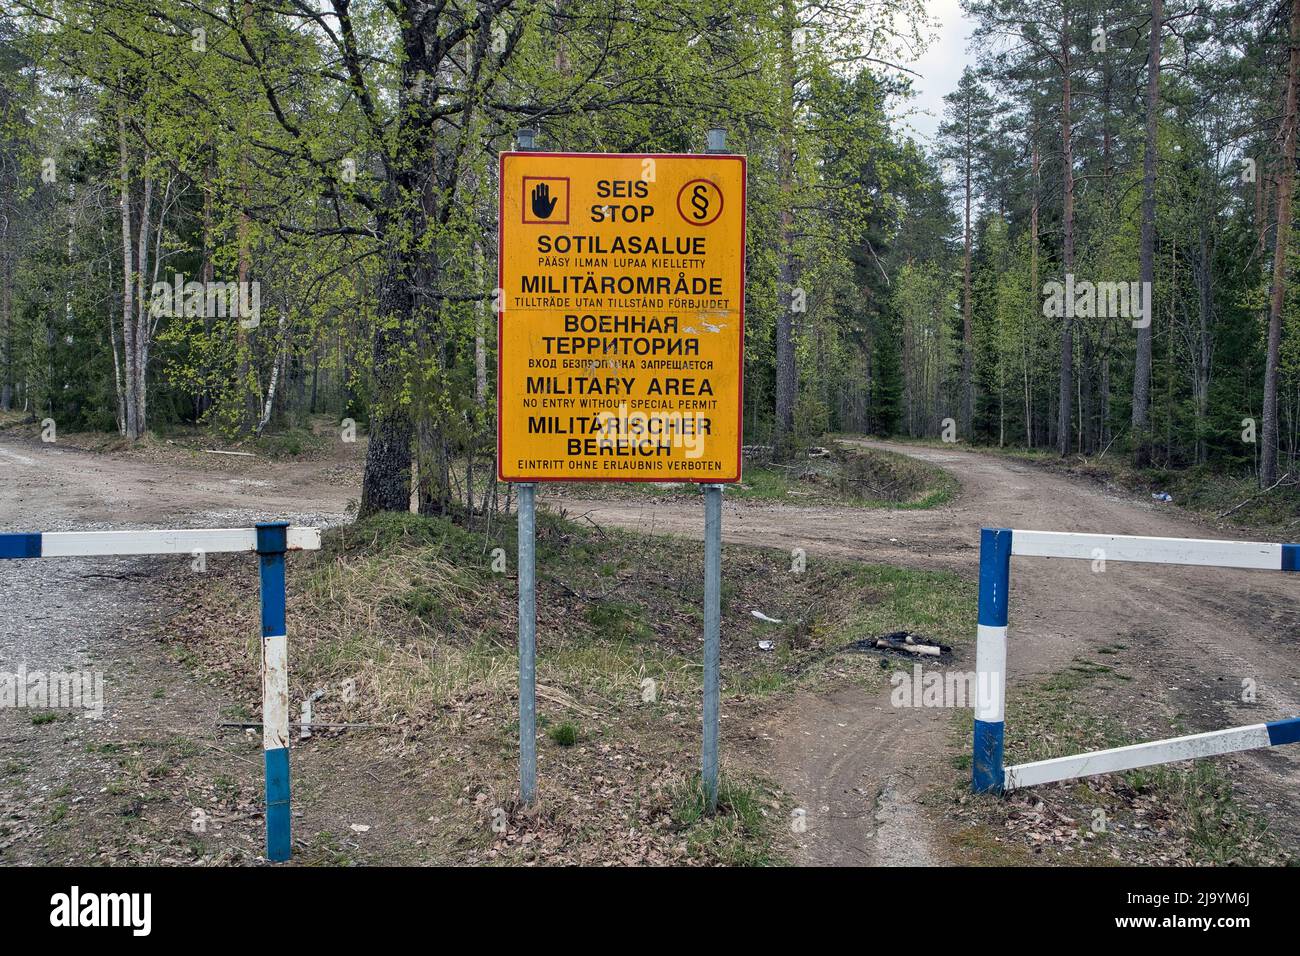 Military area keep out sign in Finnish, Swedish, Russian, English and German texts, Finland Stock Photo